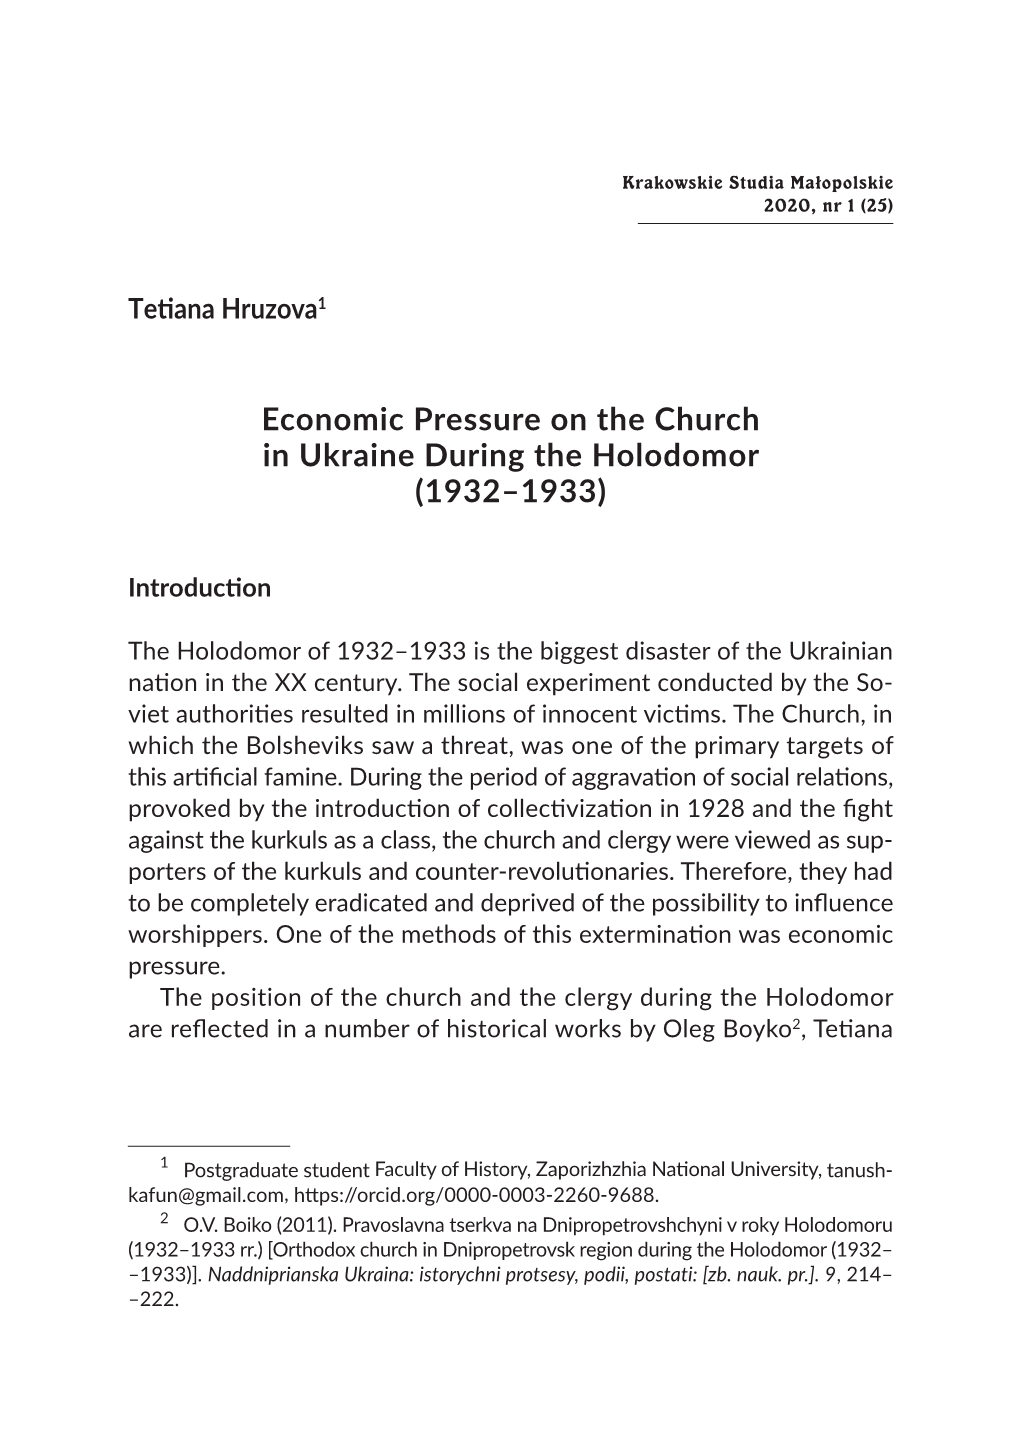 Economic Pressure on the Church in Ukraine During the Holodomor (1932–1933)